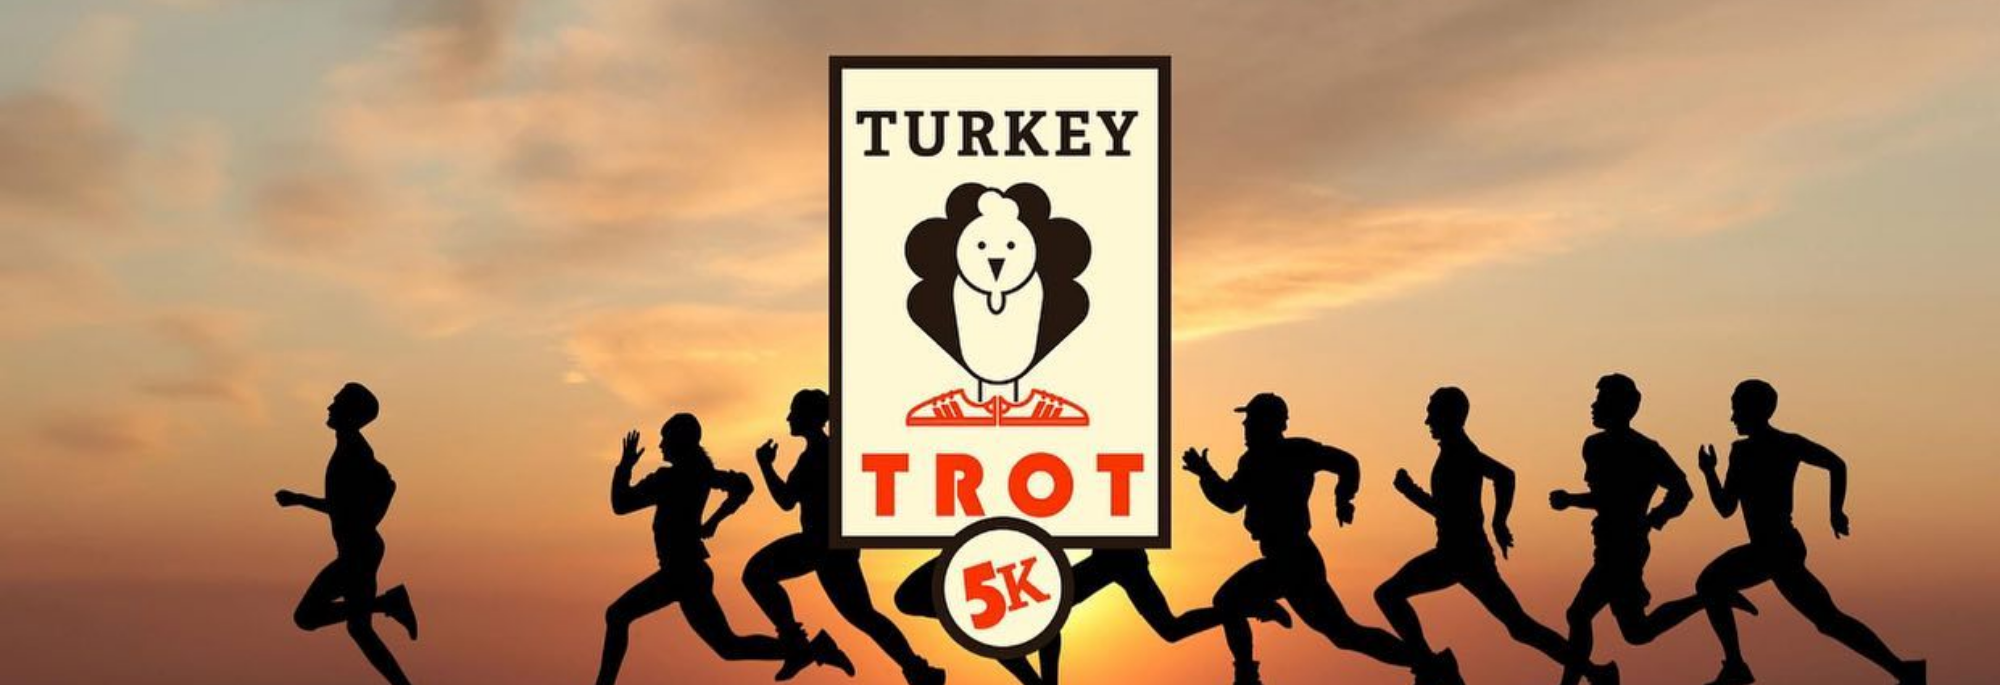 Image of runners with Turkey Trot event logo 